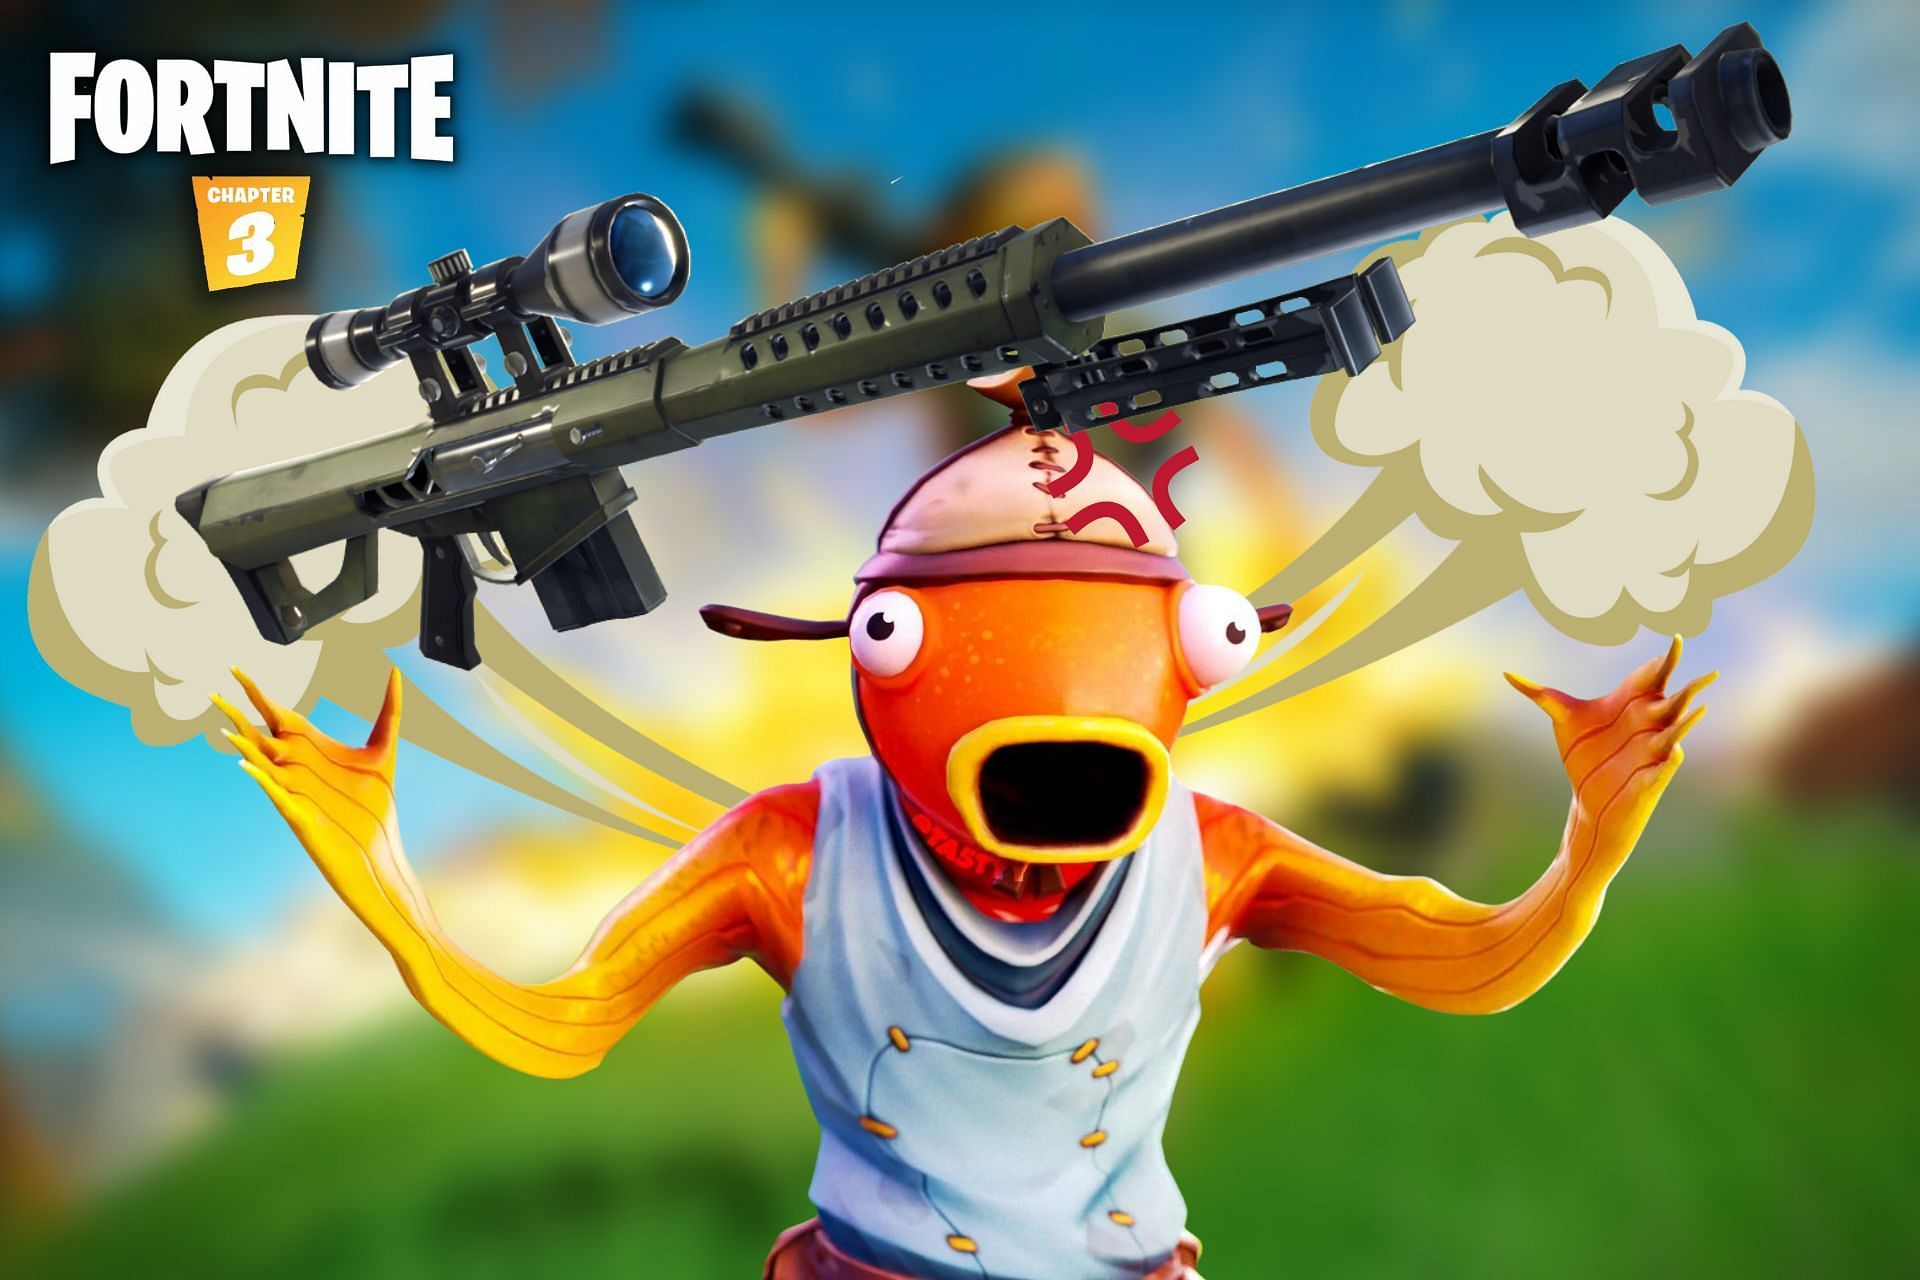 SNIPERS ONLY CHALLENGE (Fortnite) 